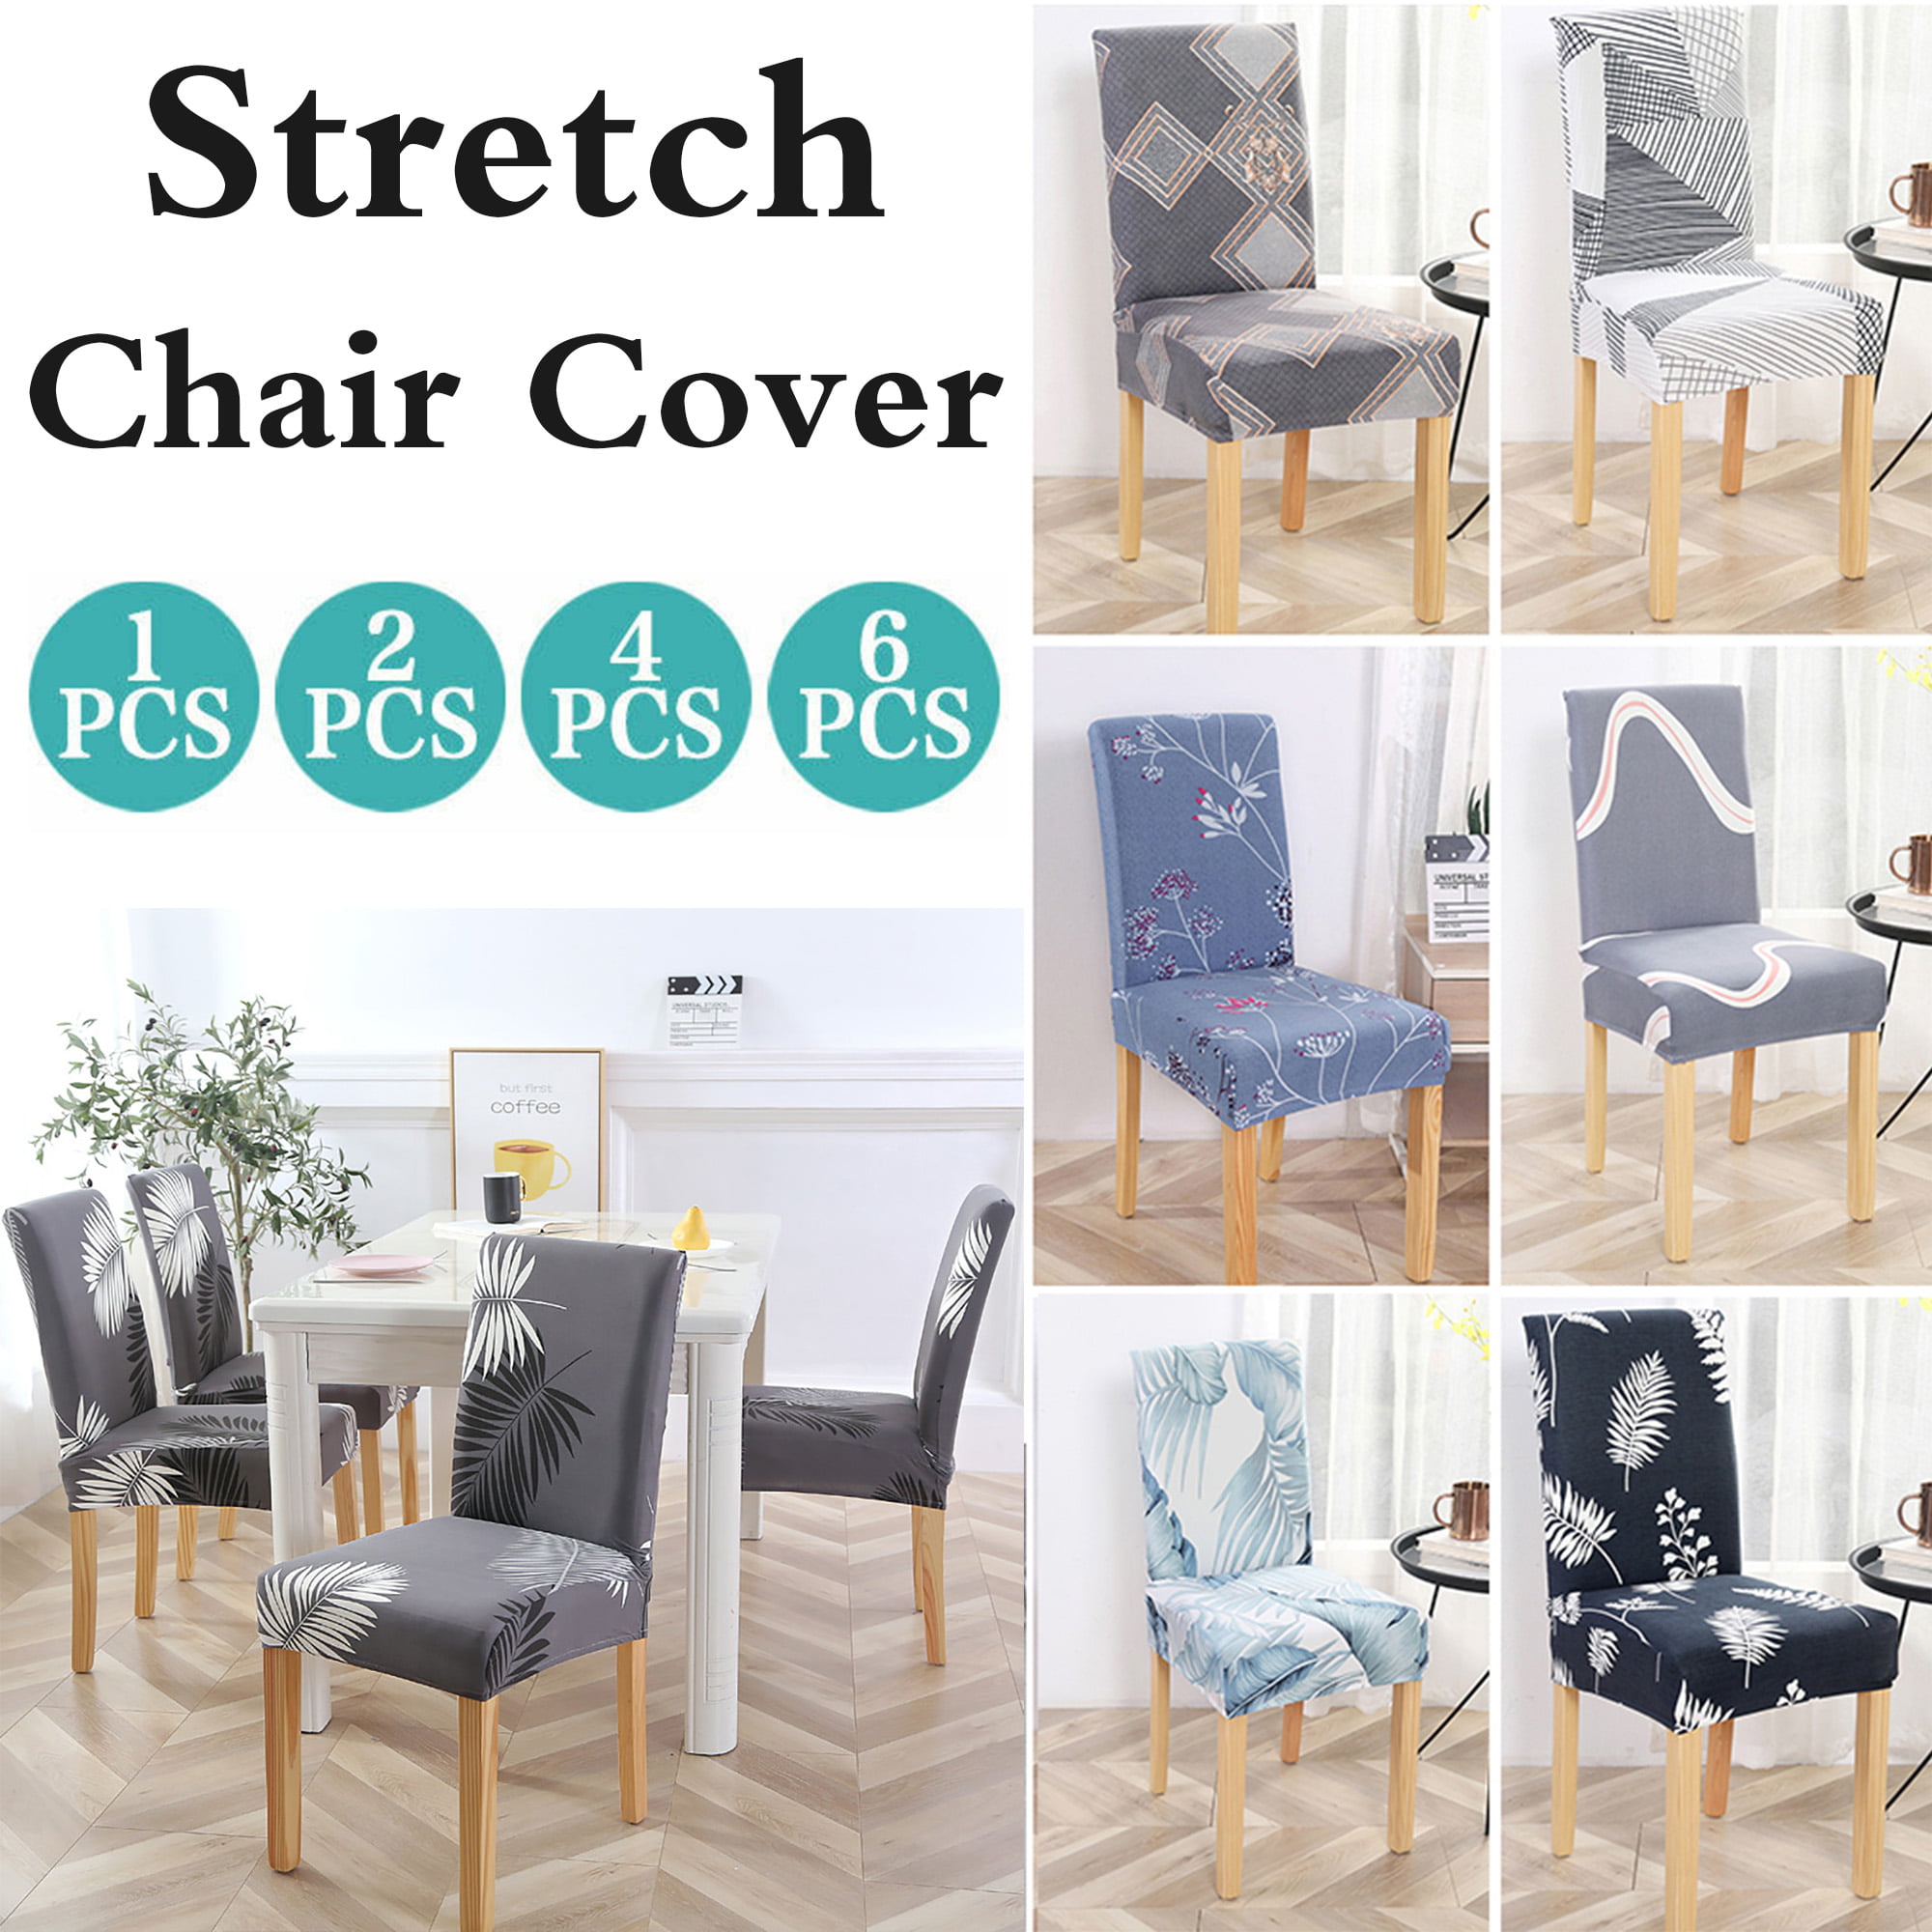 Elastic Stretch Seat Covers SET Chair Slipcover for Dining Chair Wedding Decor # 